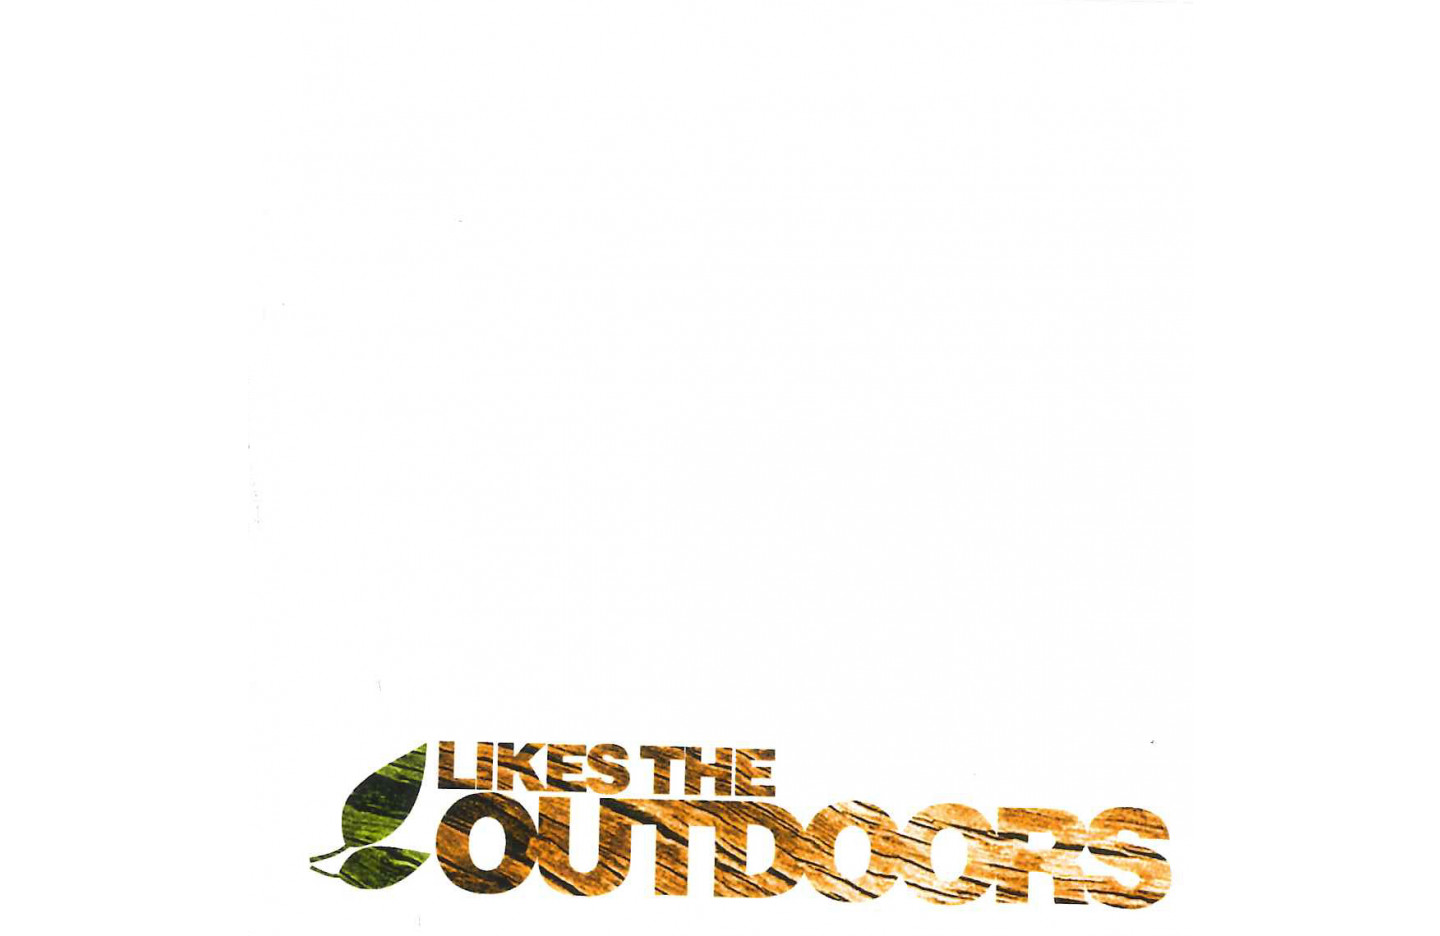 Likes the Outdoors, Ramp Gallery (2005)